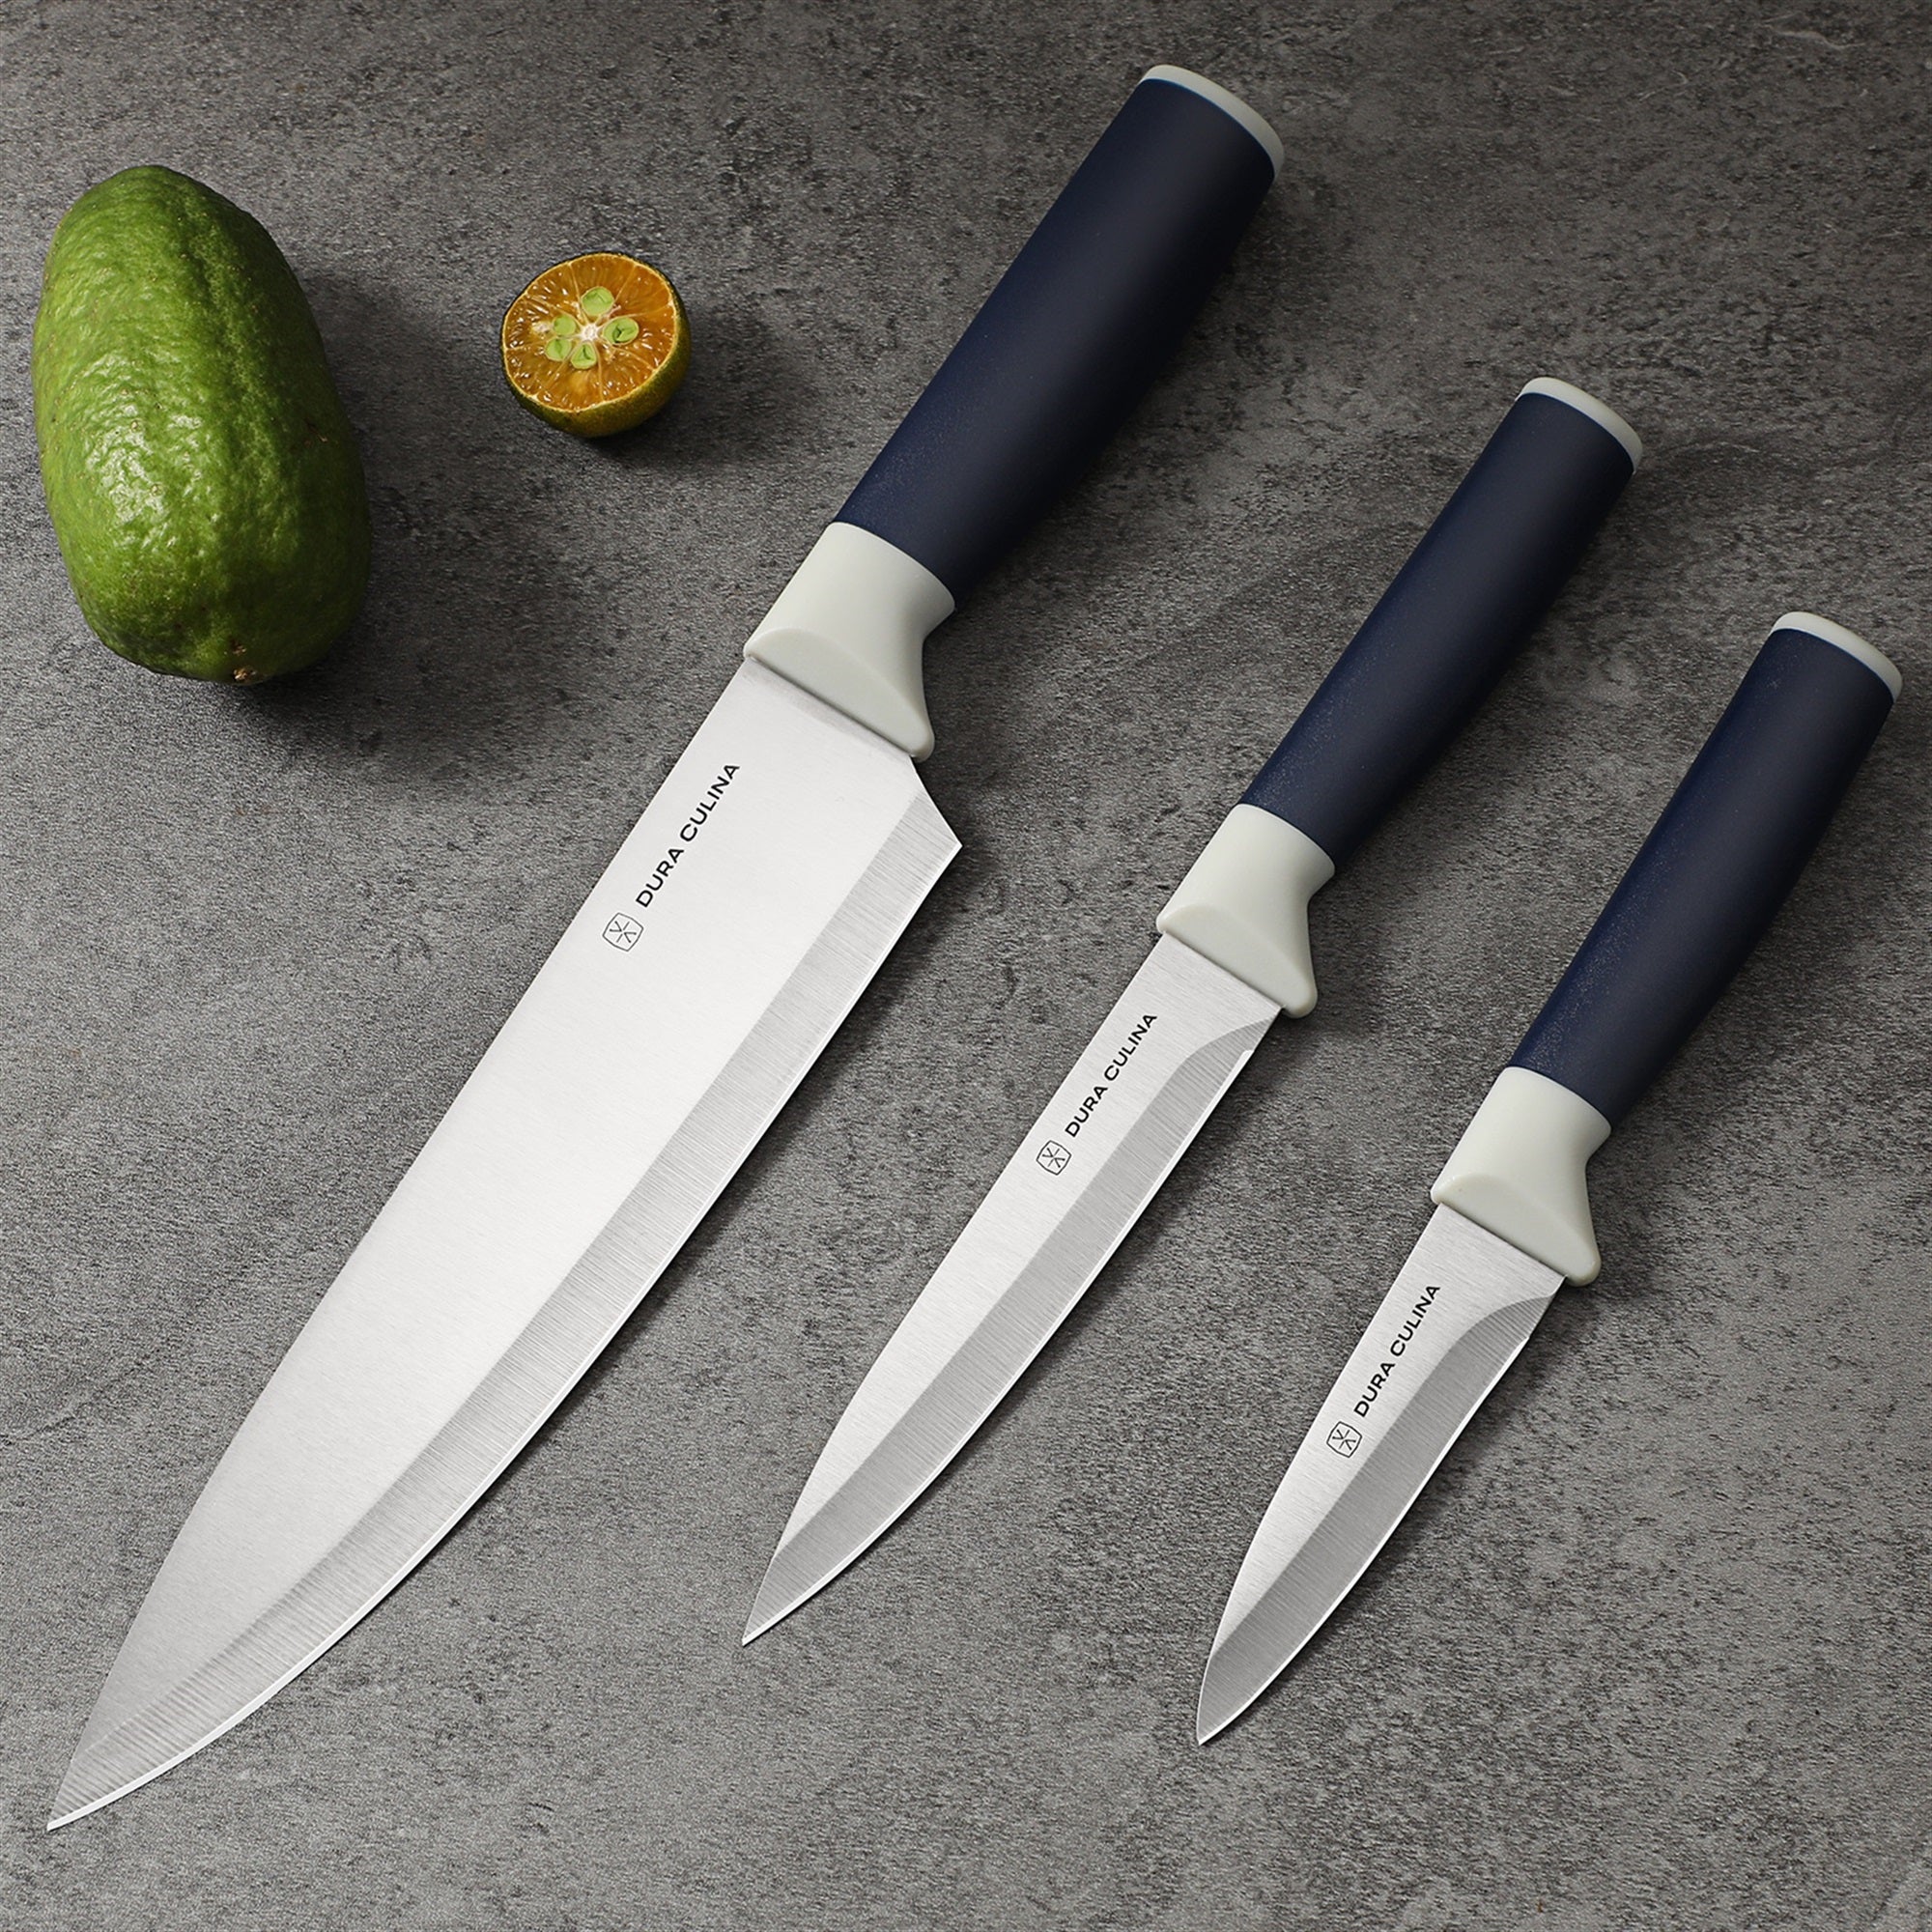 Duo-Grip 3 Piece Kitchen Knife Set With Blade Guards, Grey